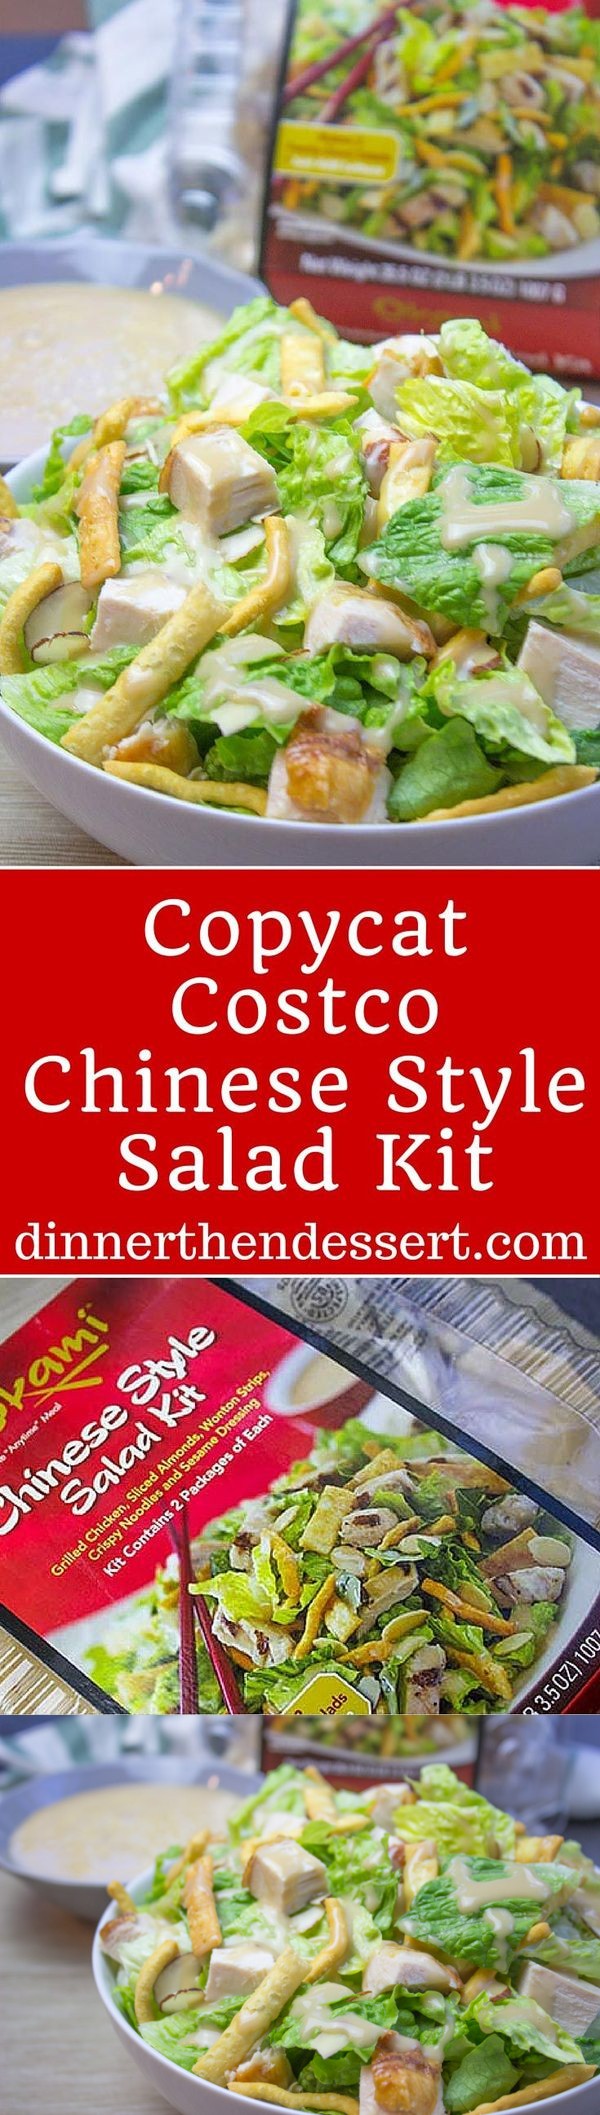 Asian Chicken Salad with Sesame Dressing (Costco Copycat